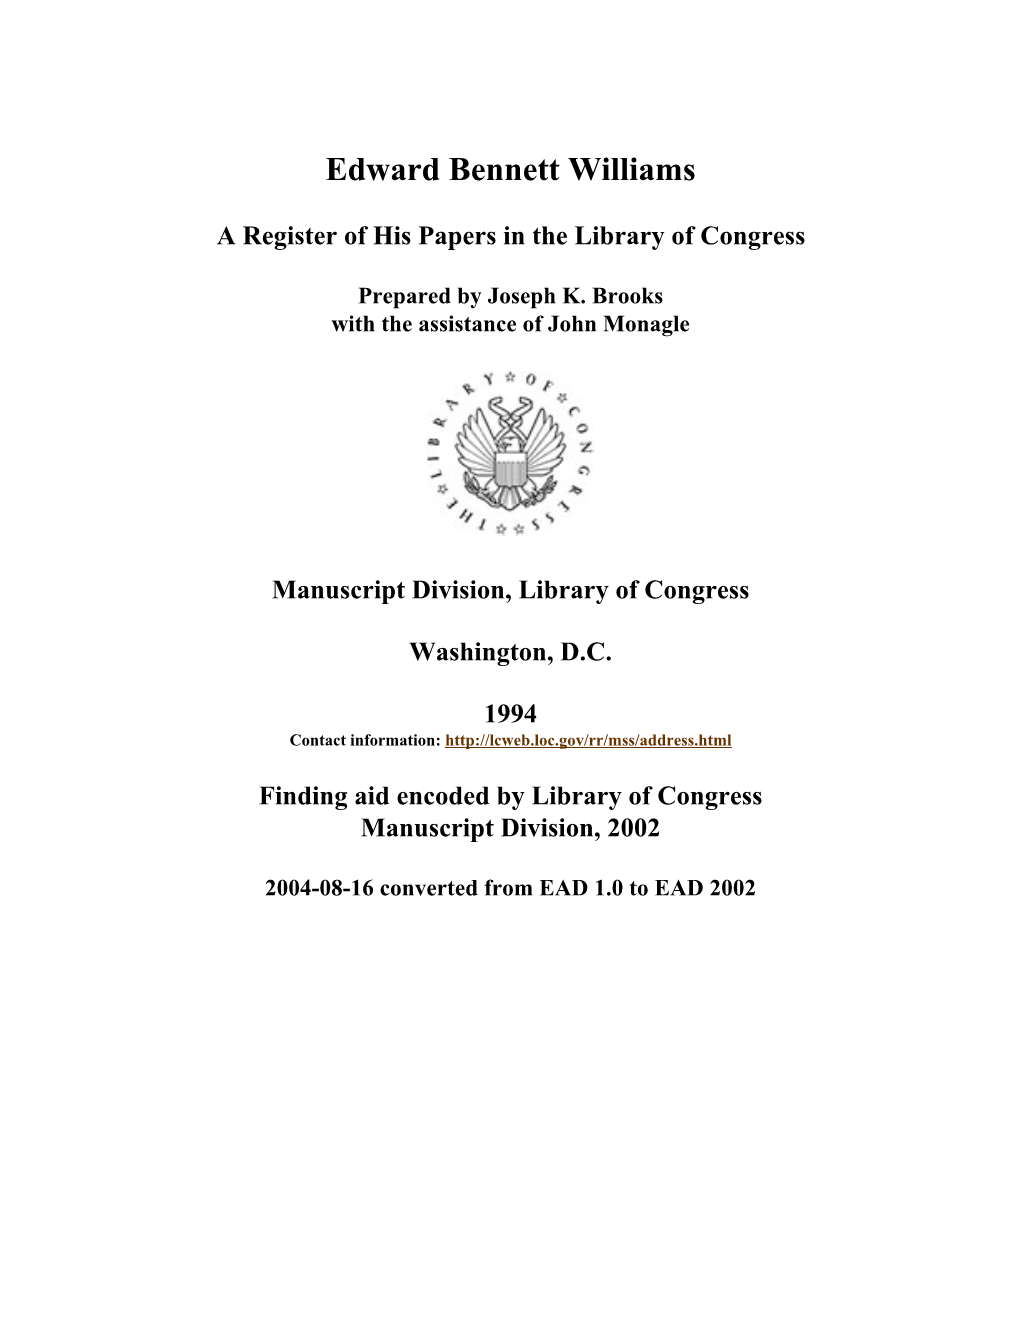 Papers of Edward Bennett Williams